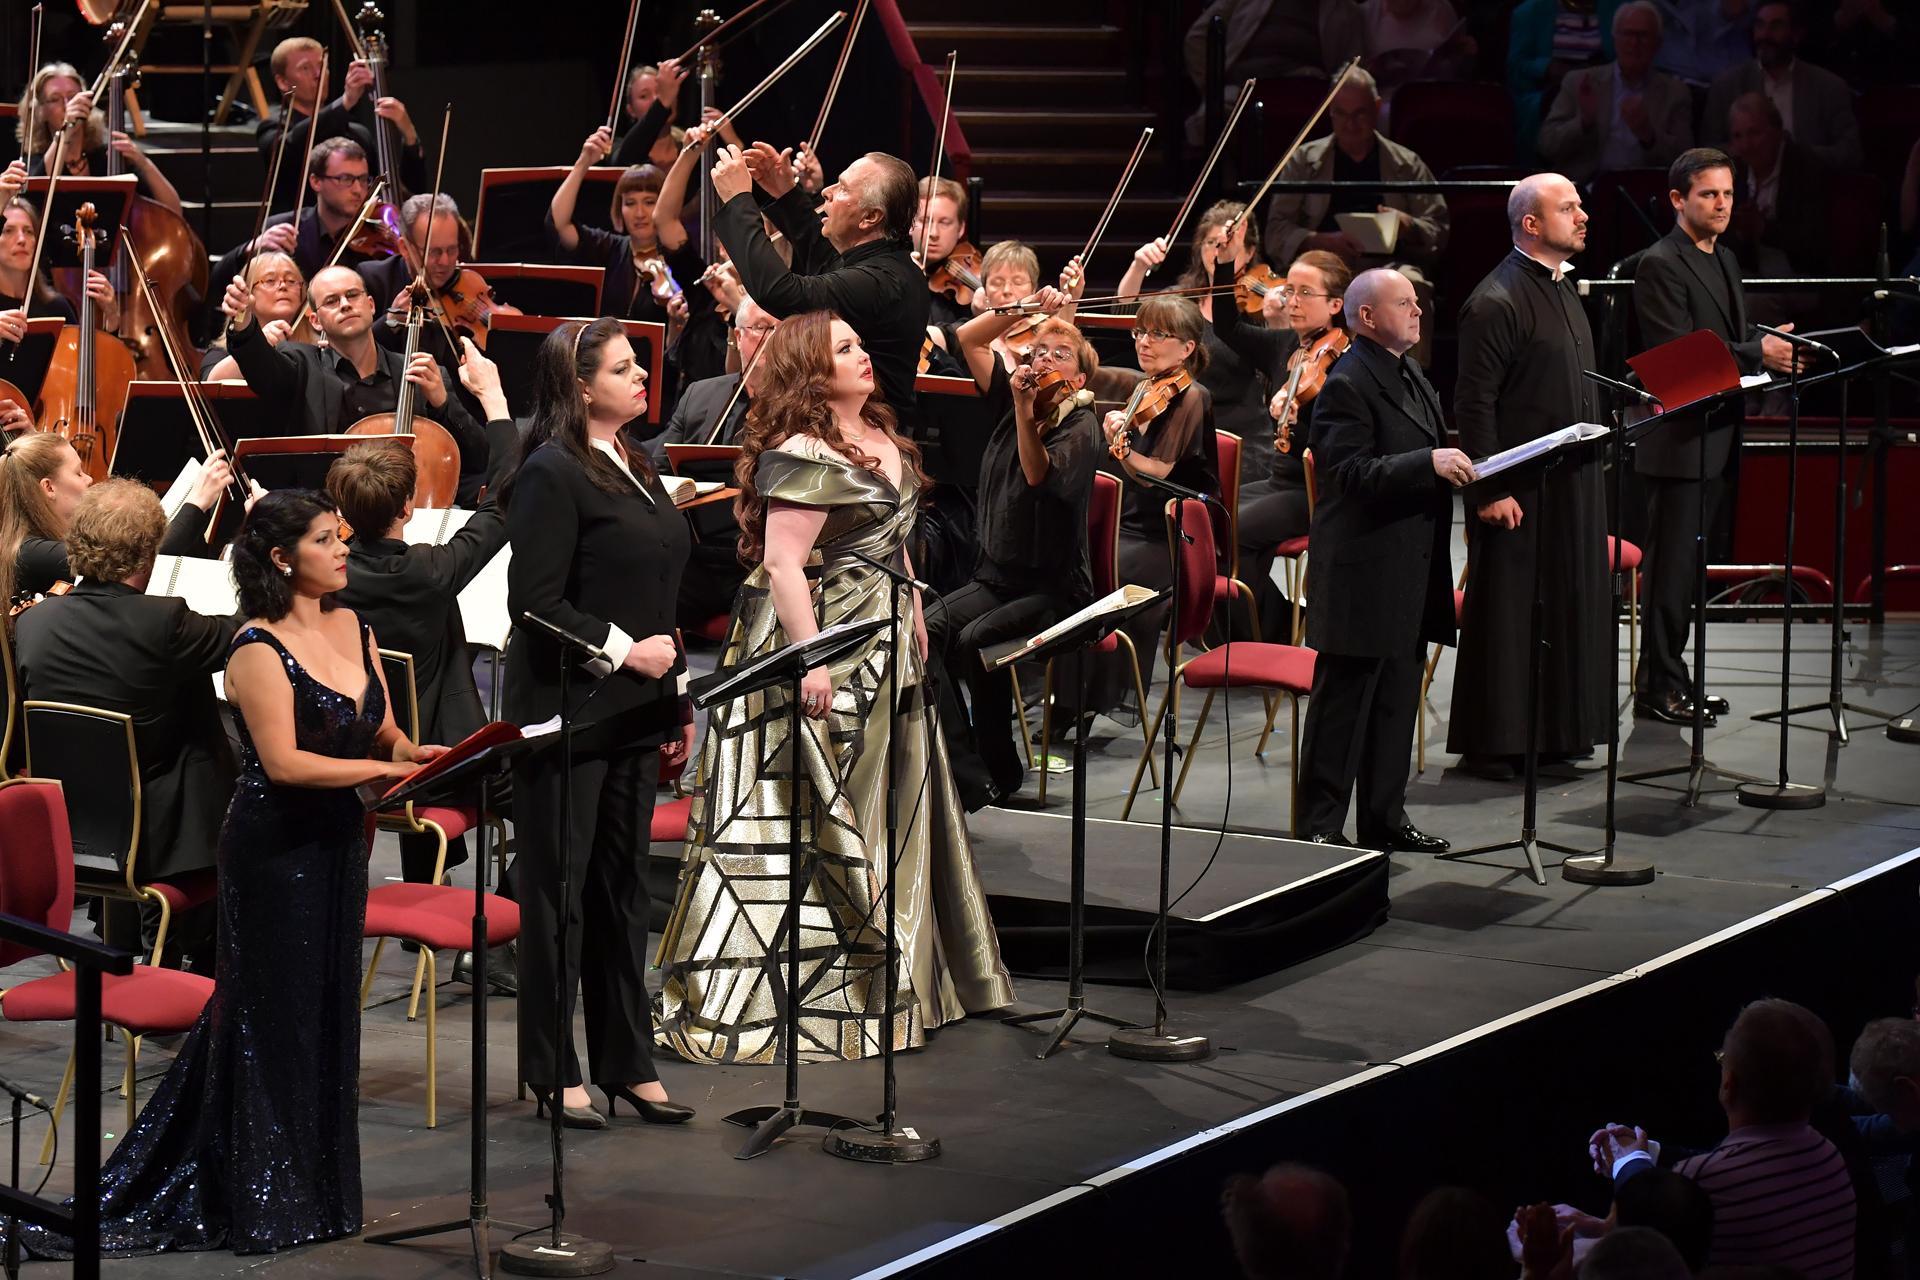 Prom 68: Susana Gaspar, Daniela Barcellona, Albina Shagimuratova, Barry Banks, Gianluca Buratto and Mirco Palazzi perform with the Opera Rara Chorus and the Orchestra of the Age of Enlightenment conducted by Sir Mark Elder at the BBC Proms 2016